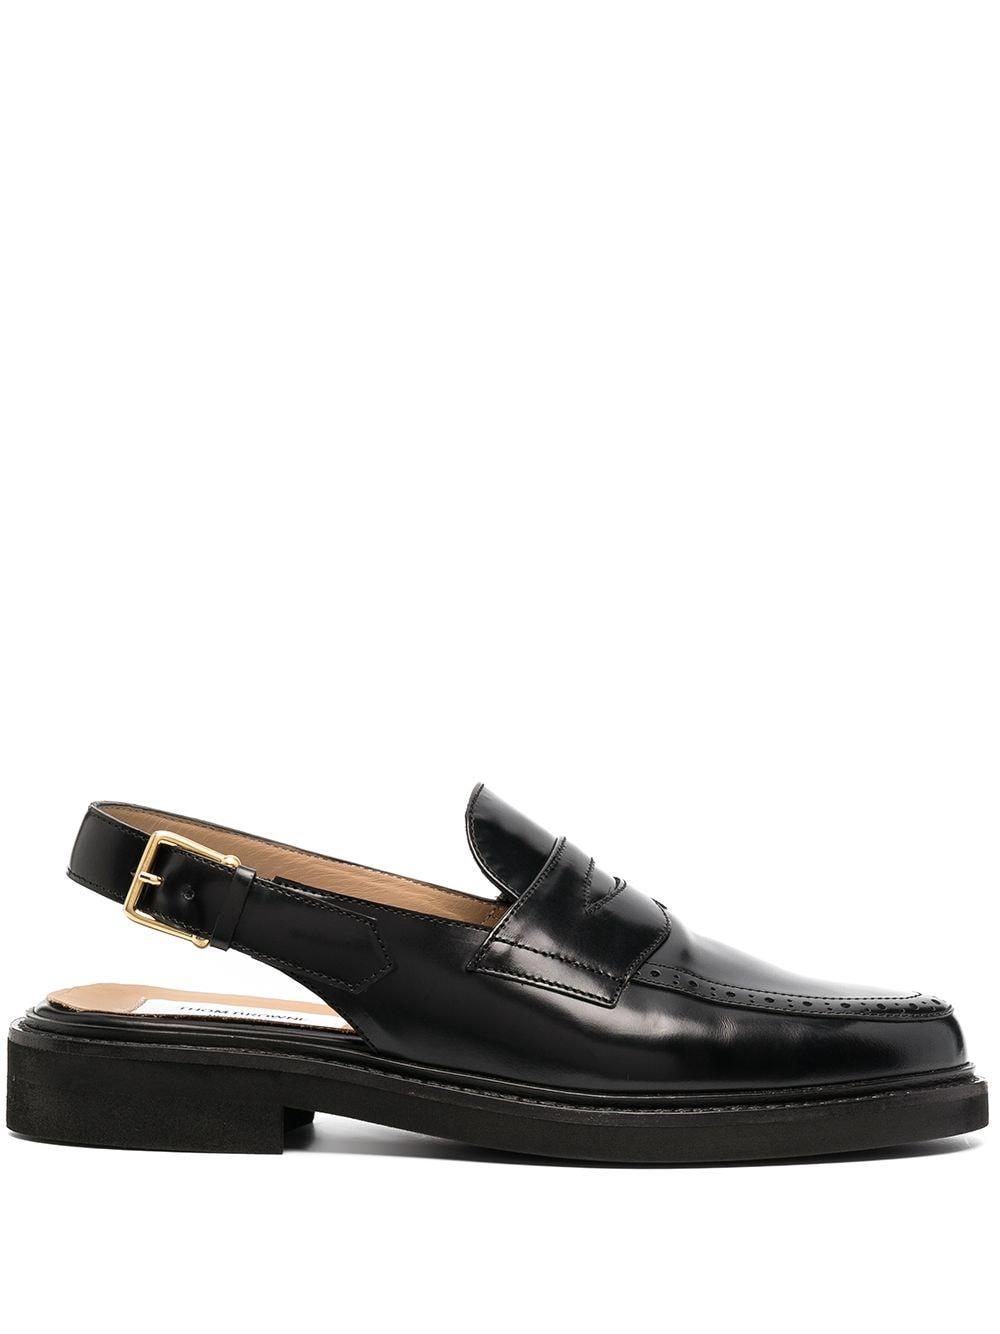 Thom Browne Slingback Penny Loafer in Black | Lyst